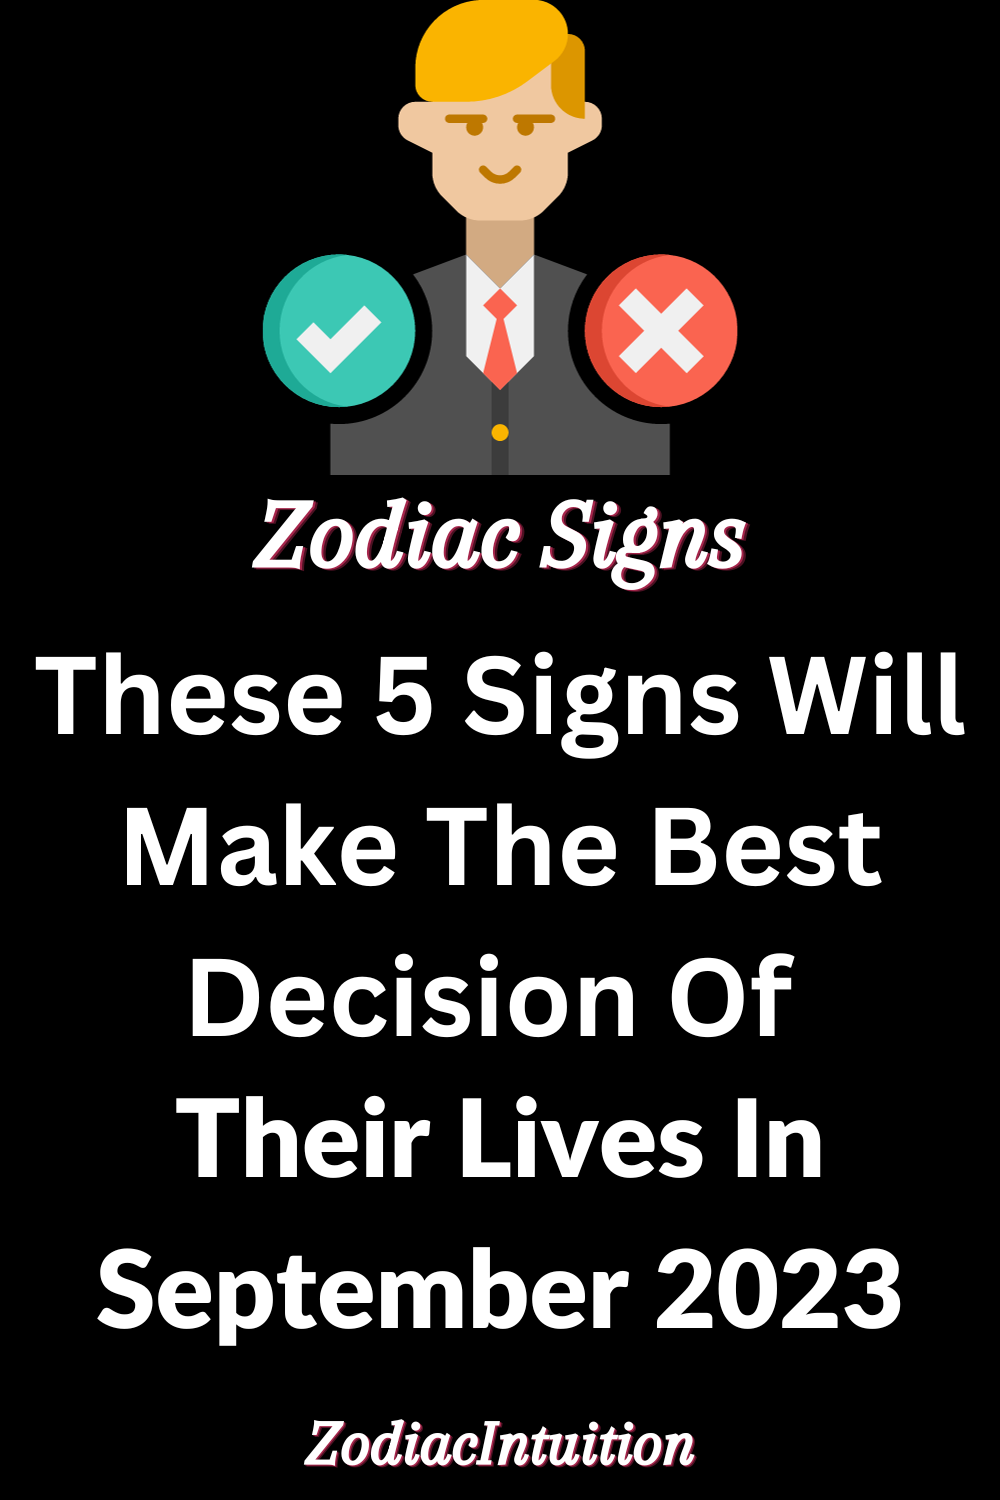 These 5 Signs Will Make The Best Decision Of Their Lives In September 2023